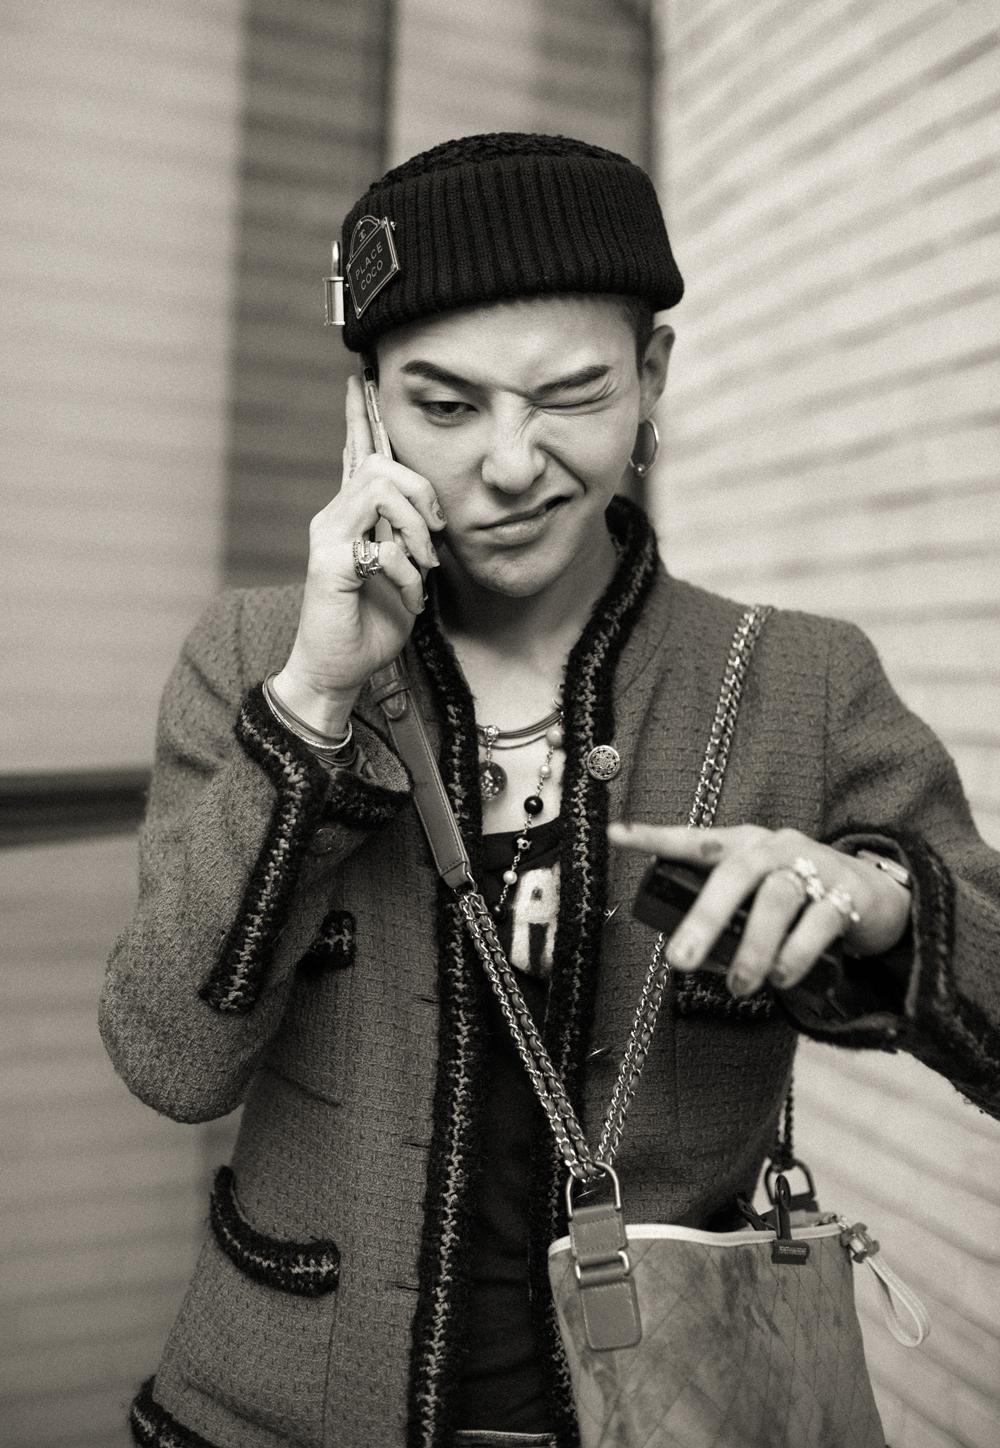 Korean Style Is About Moving Fast': G-Dragon Discusses the Sound